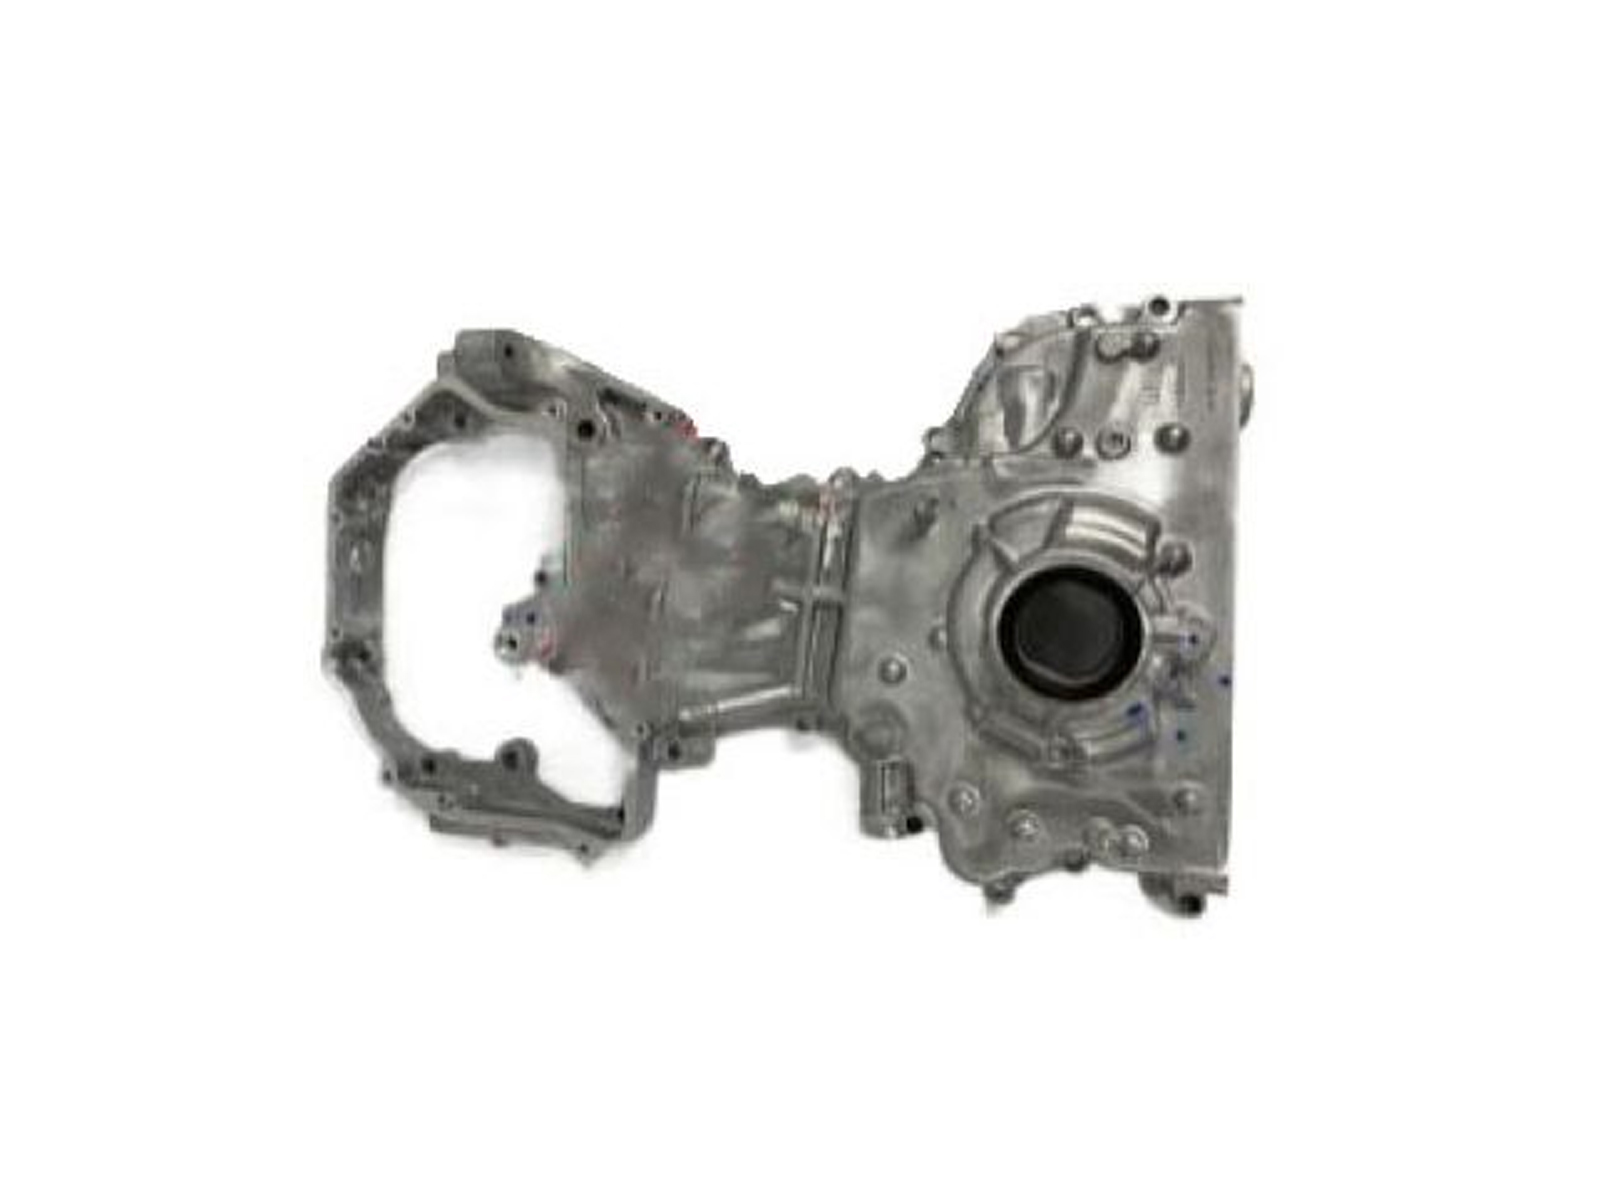 OEM '13-'18 Nissan Front Chain Cover - QR25DE - Z1 Motorsports - Performance OEM and Aftermarket Engineered Parts Leader In 300ZX 350Z 370Z G35 G37 Q50 Q60